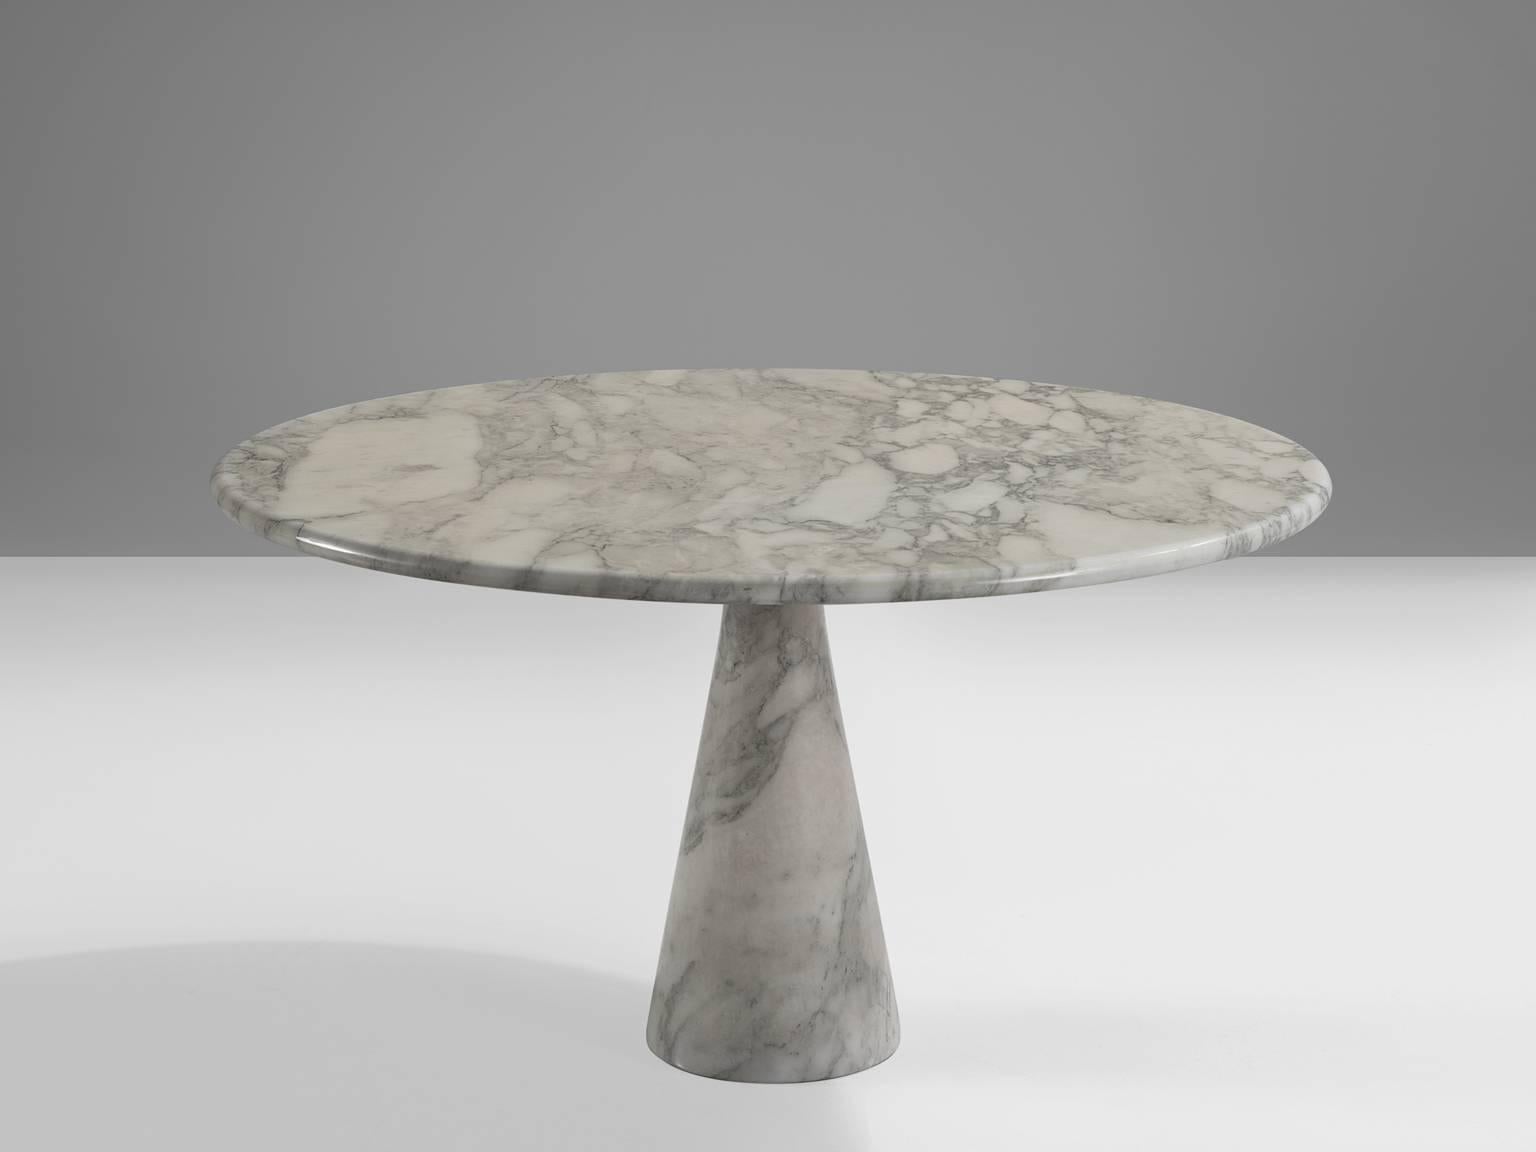 Angelo Mangiarotti for Skipper, M1 centre table, marble, Italy, 1969

This table is part of our postmodern design collection. The patterned white table has a cone shaped base and a circular top. The circular top rests perfectly on the cone. The